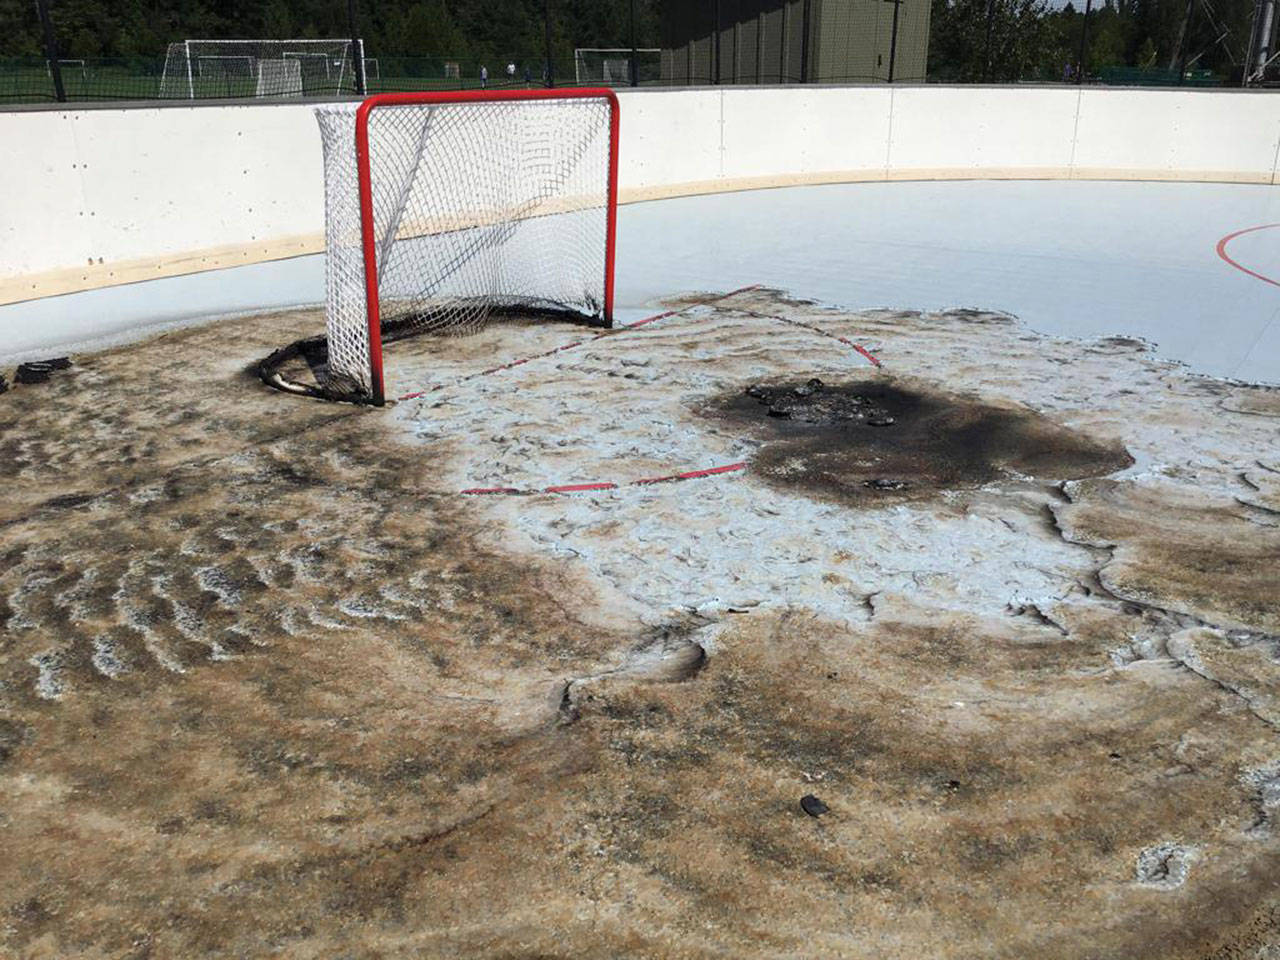 Photo courtesy of Bainbridge Roller Hockey League | A fire on the Battle Point Park roller hockey rink, set sometime late Saturday or early Sunday, temporarily halted the island league’s summer season this week.